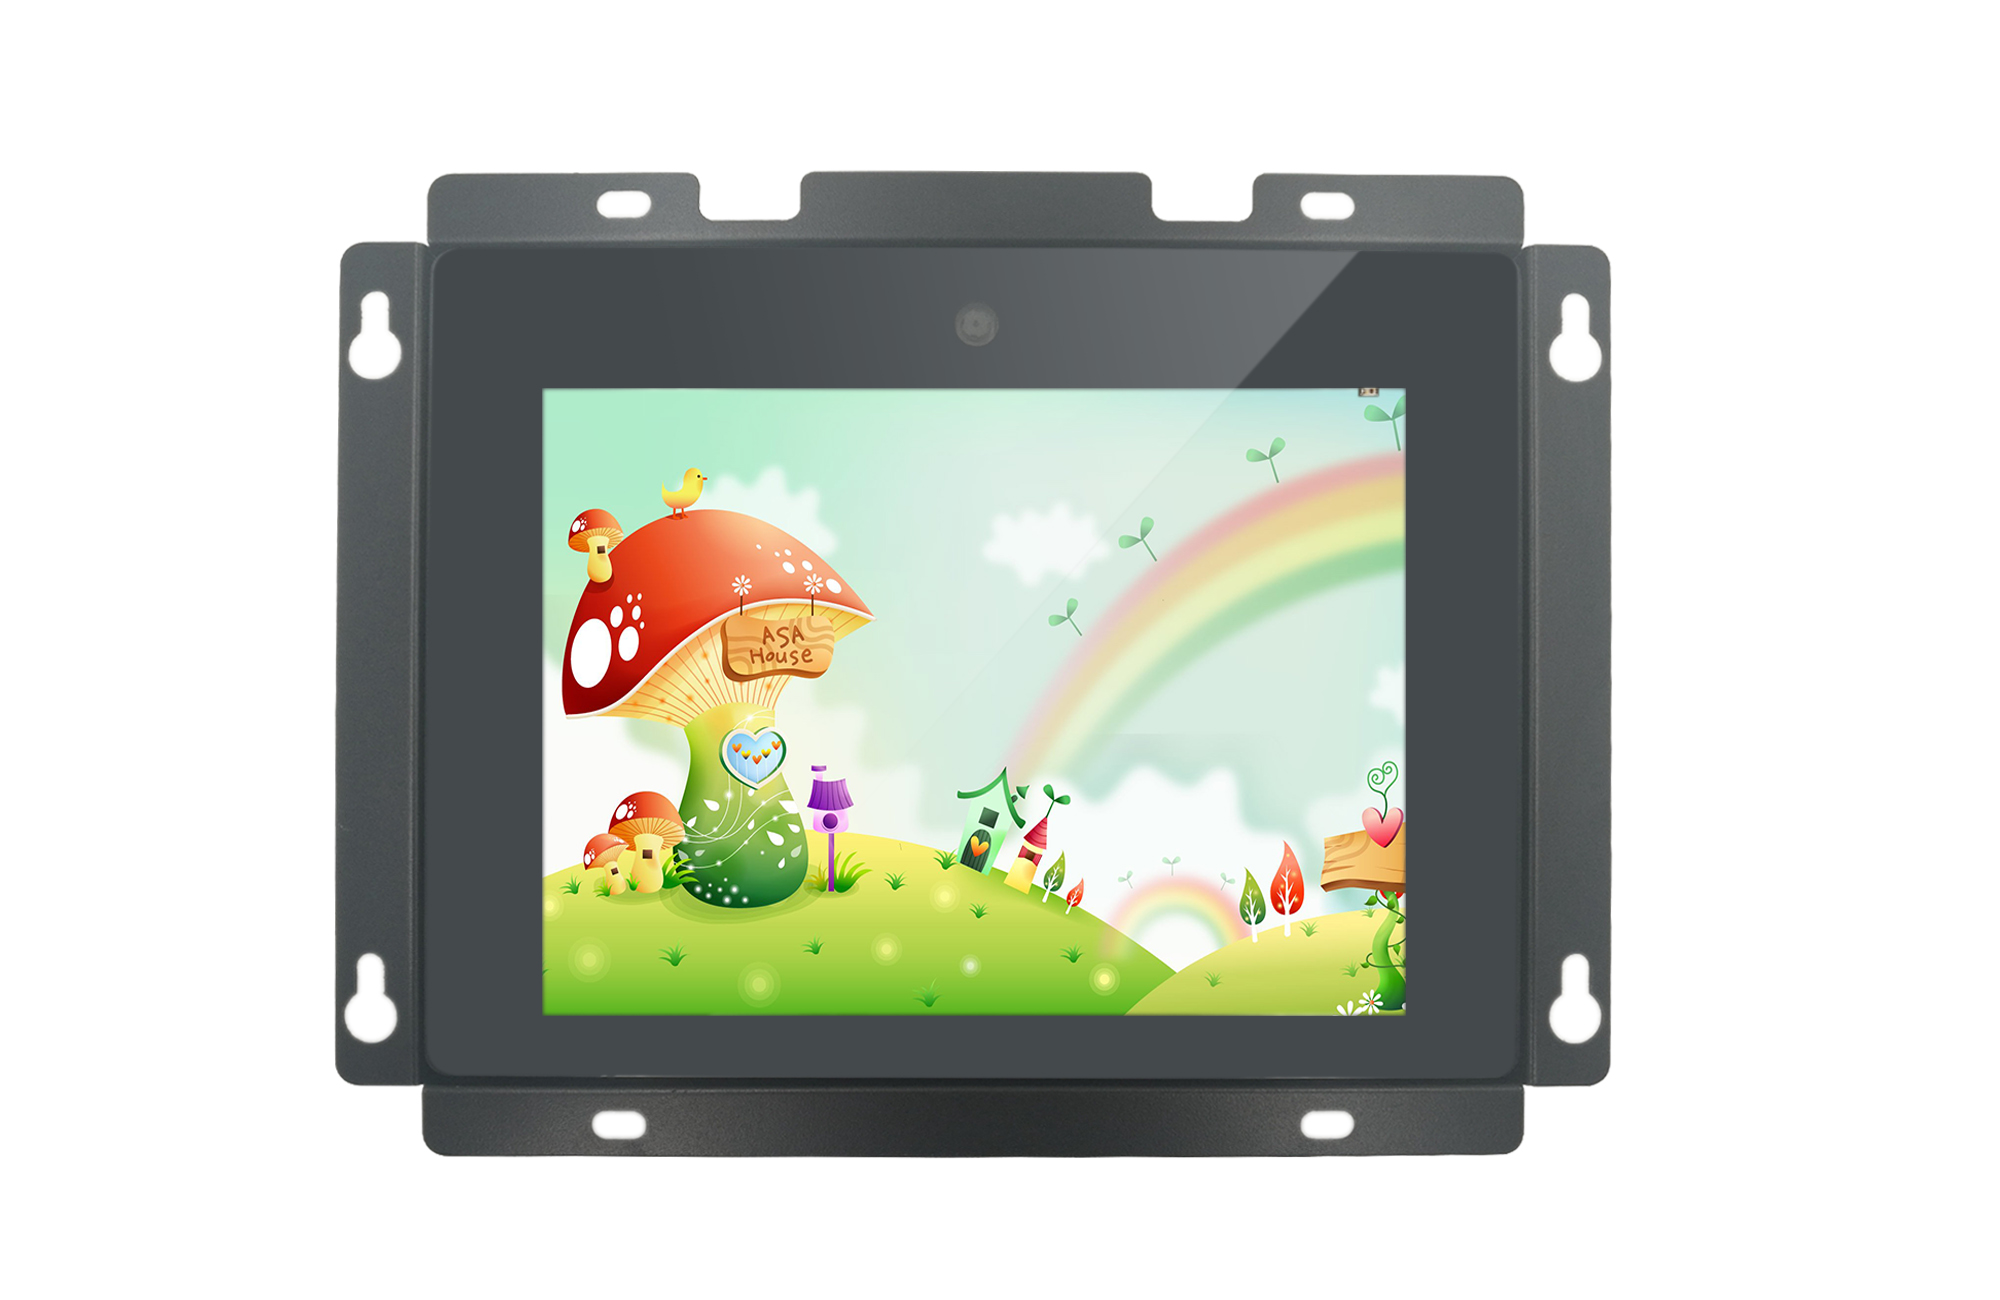 8.4 Inch Android Based All-In-One Panel PC